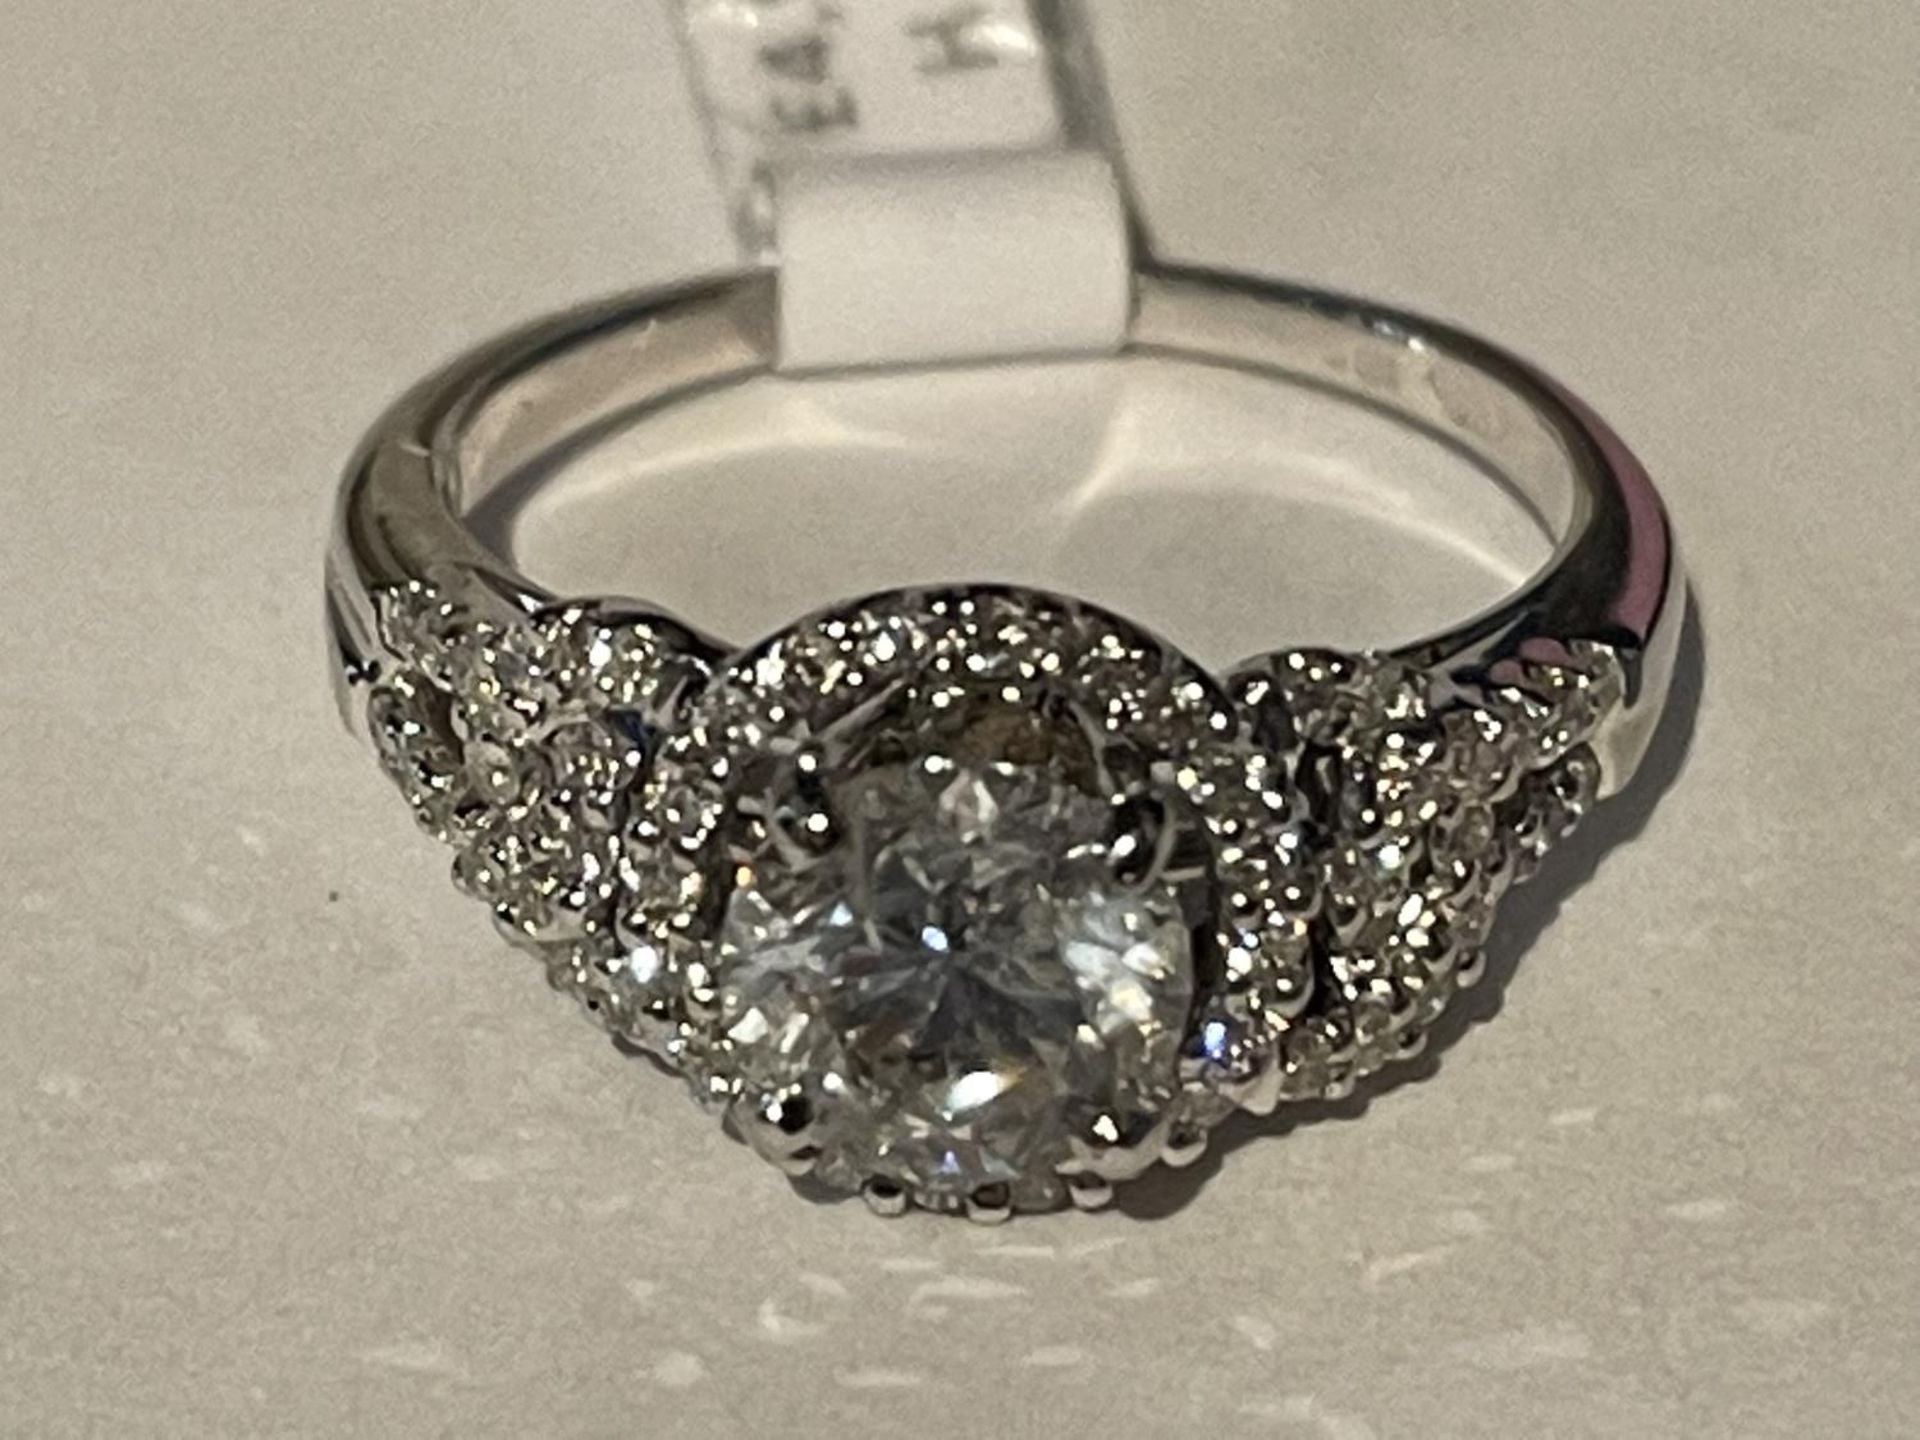 AN 18 CARAT WHITE GOLD RING WITH A CENTRAL 1.03CT SURROUNDED BY SMALL DIAMONDS MADE UP TO 0.30CT